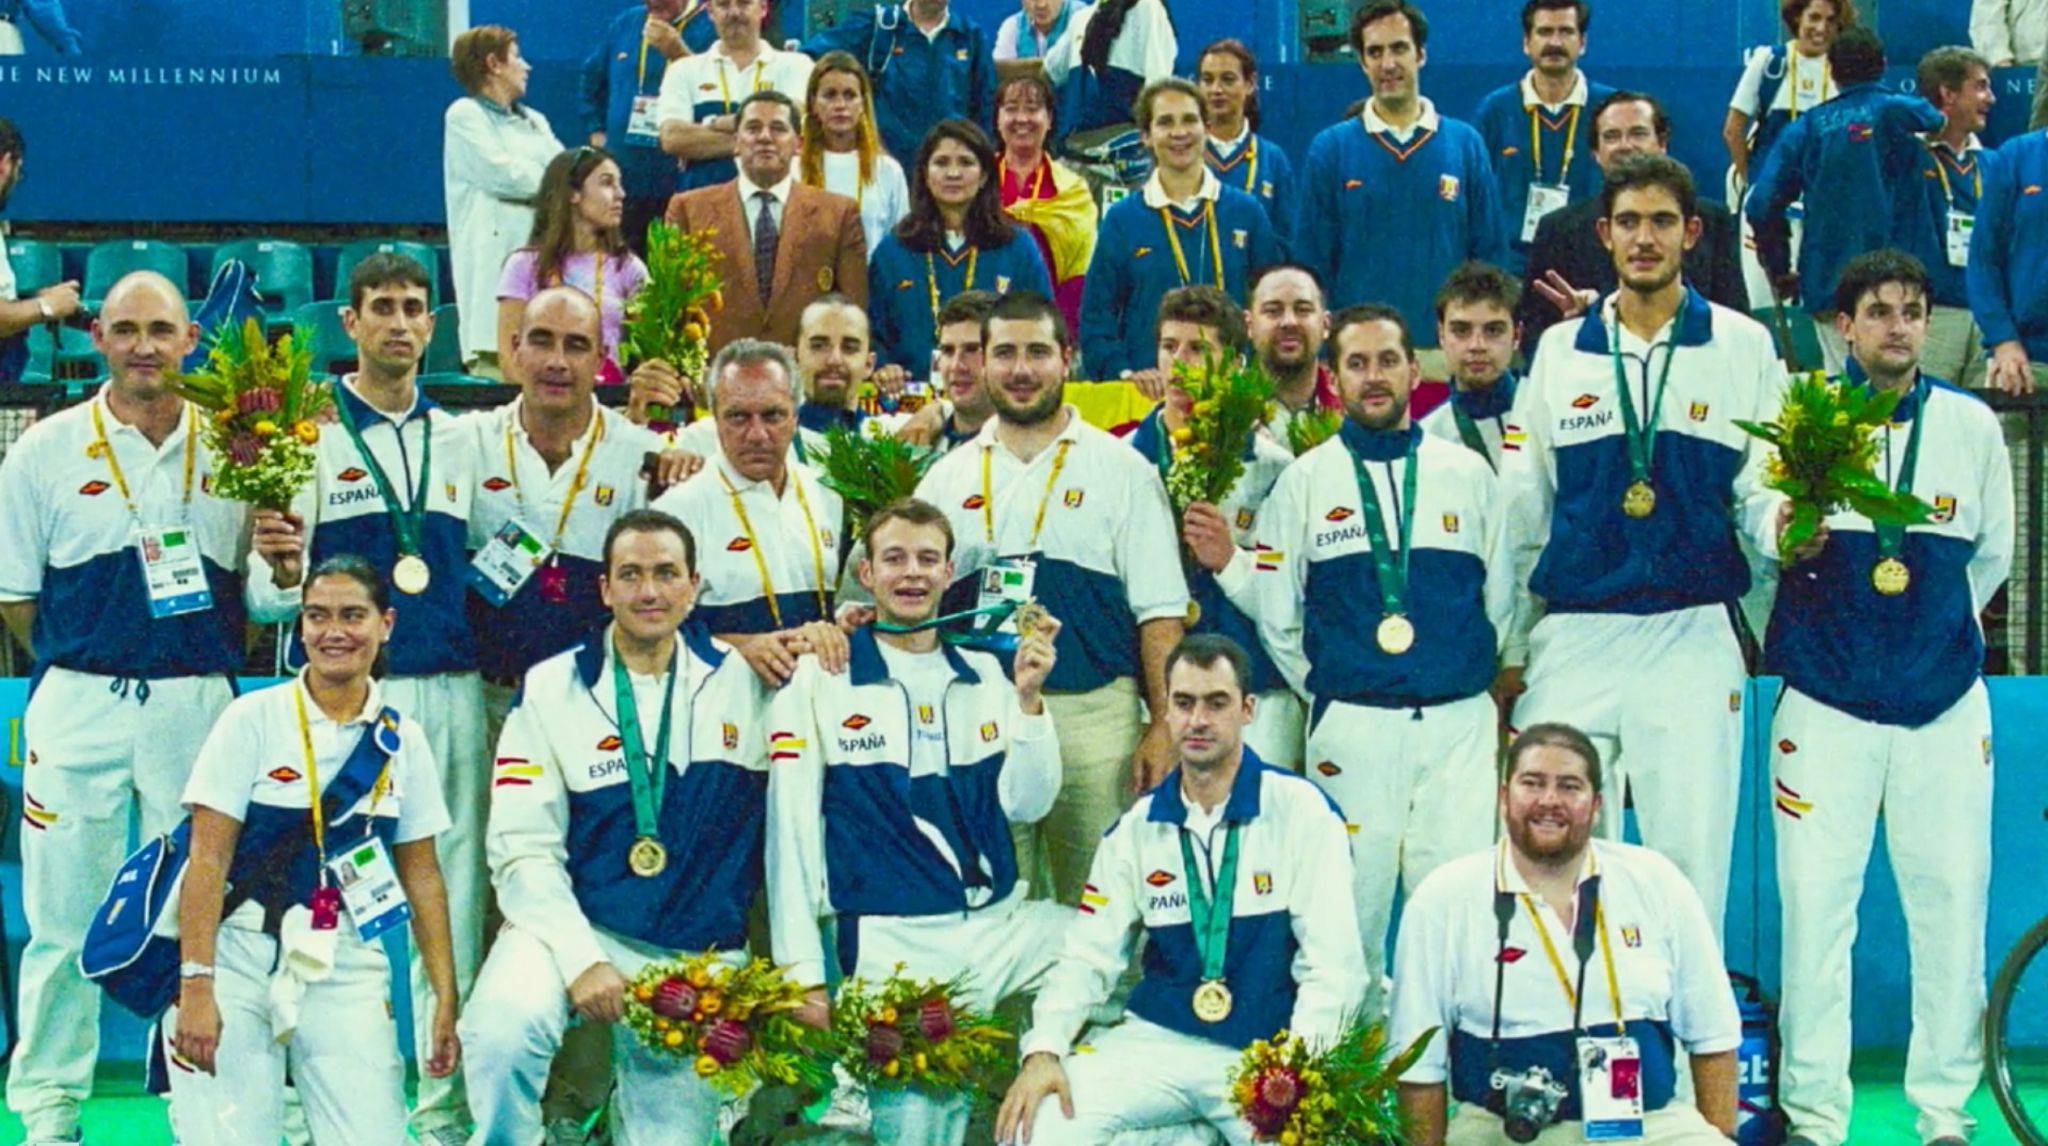 The basketball team wearing the gold medals they had to return - Fernando Martín Vicente can be seen in a brown jacket, standing behind the players